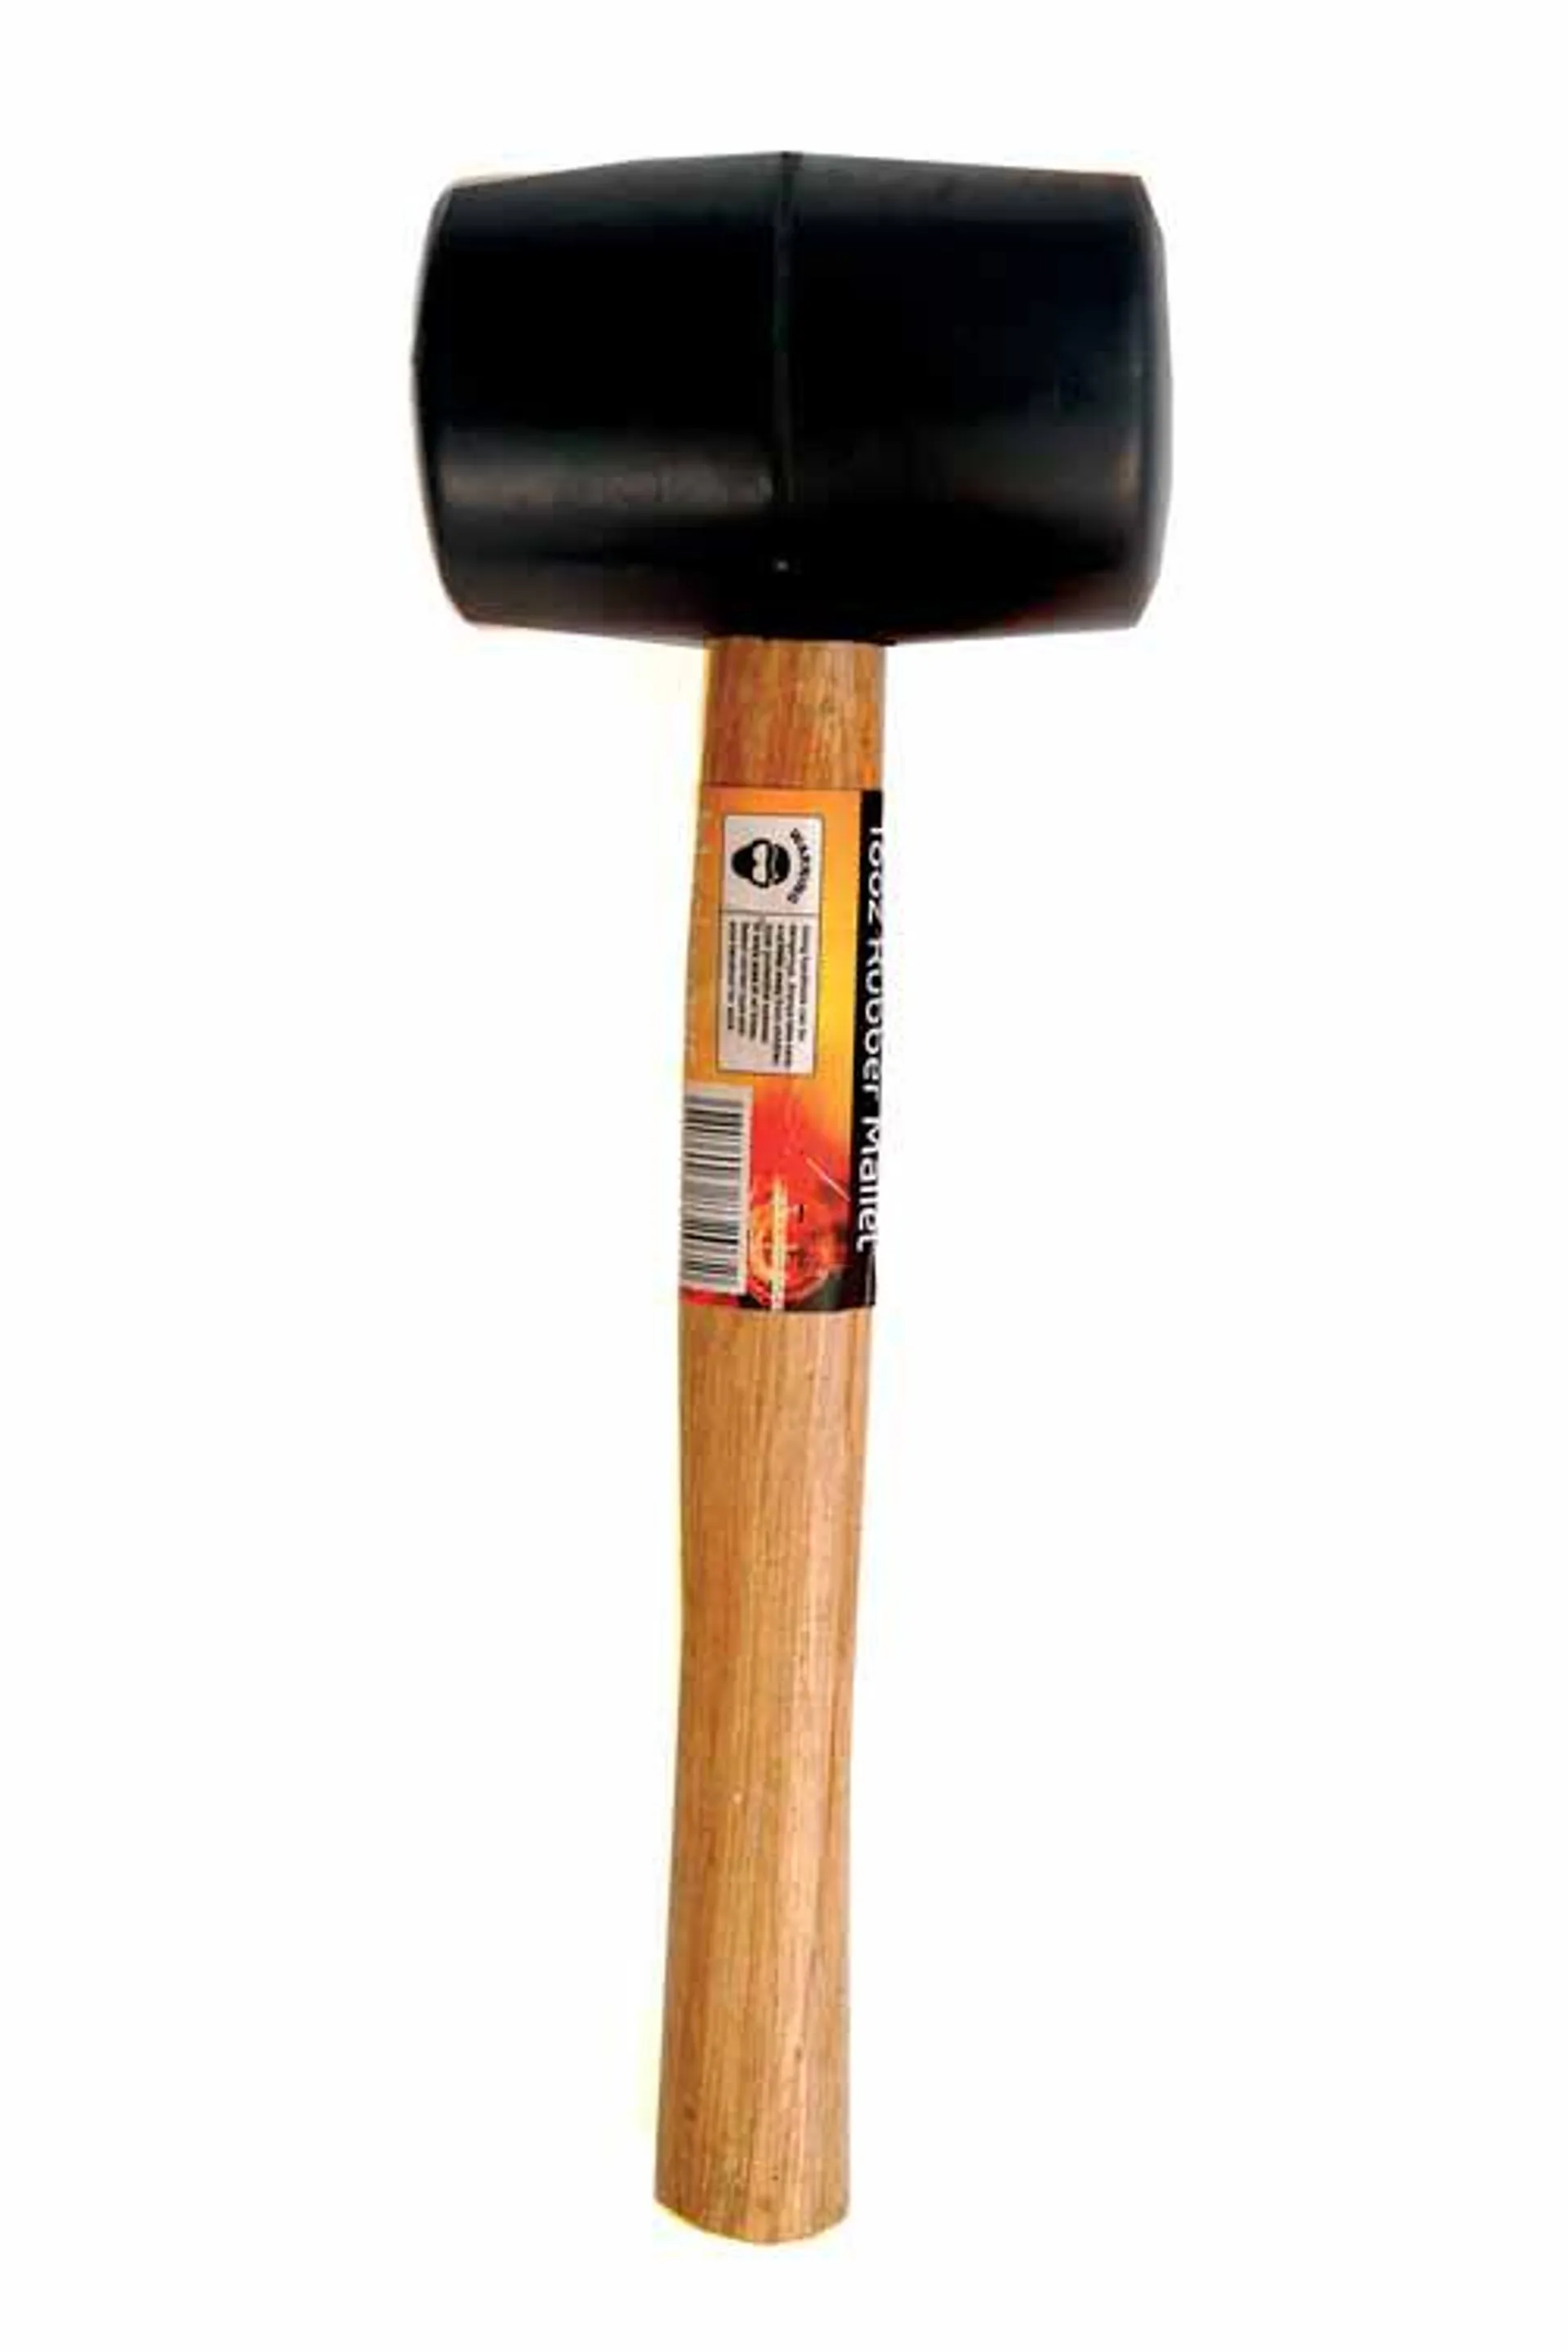 16oz Rubber Mallet with wooden shaft